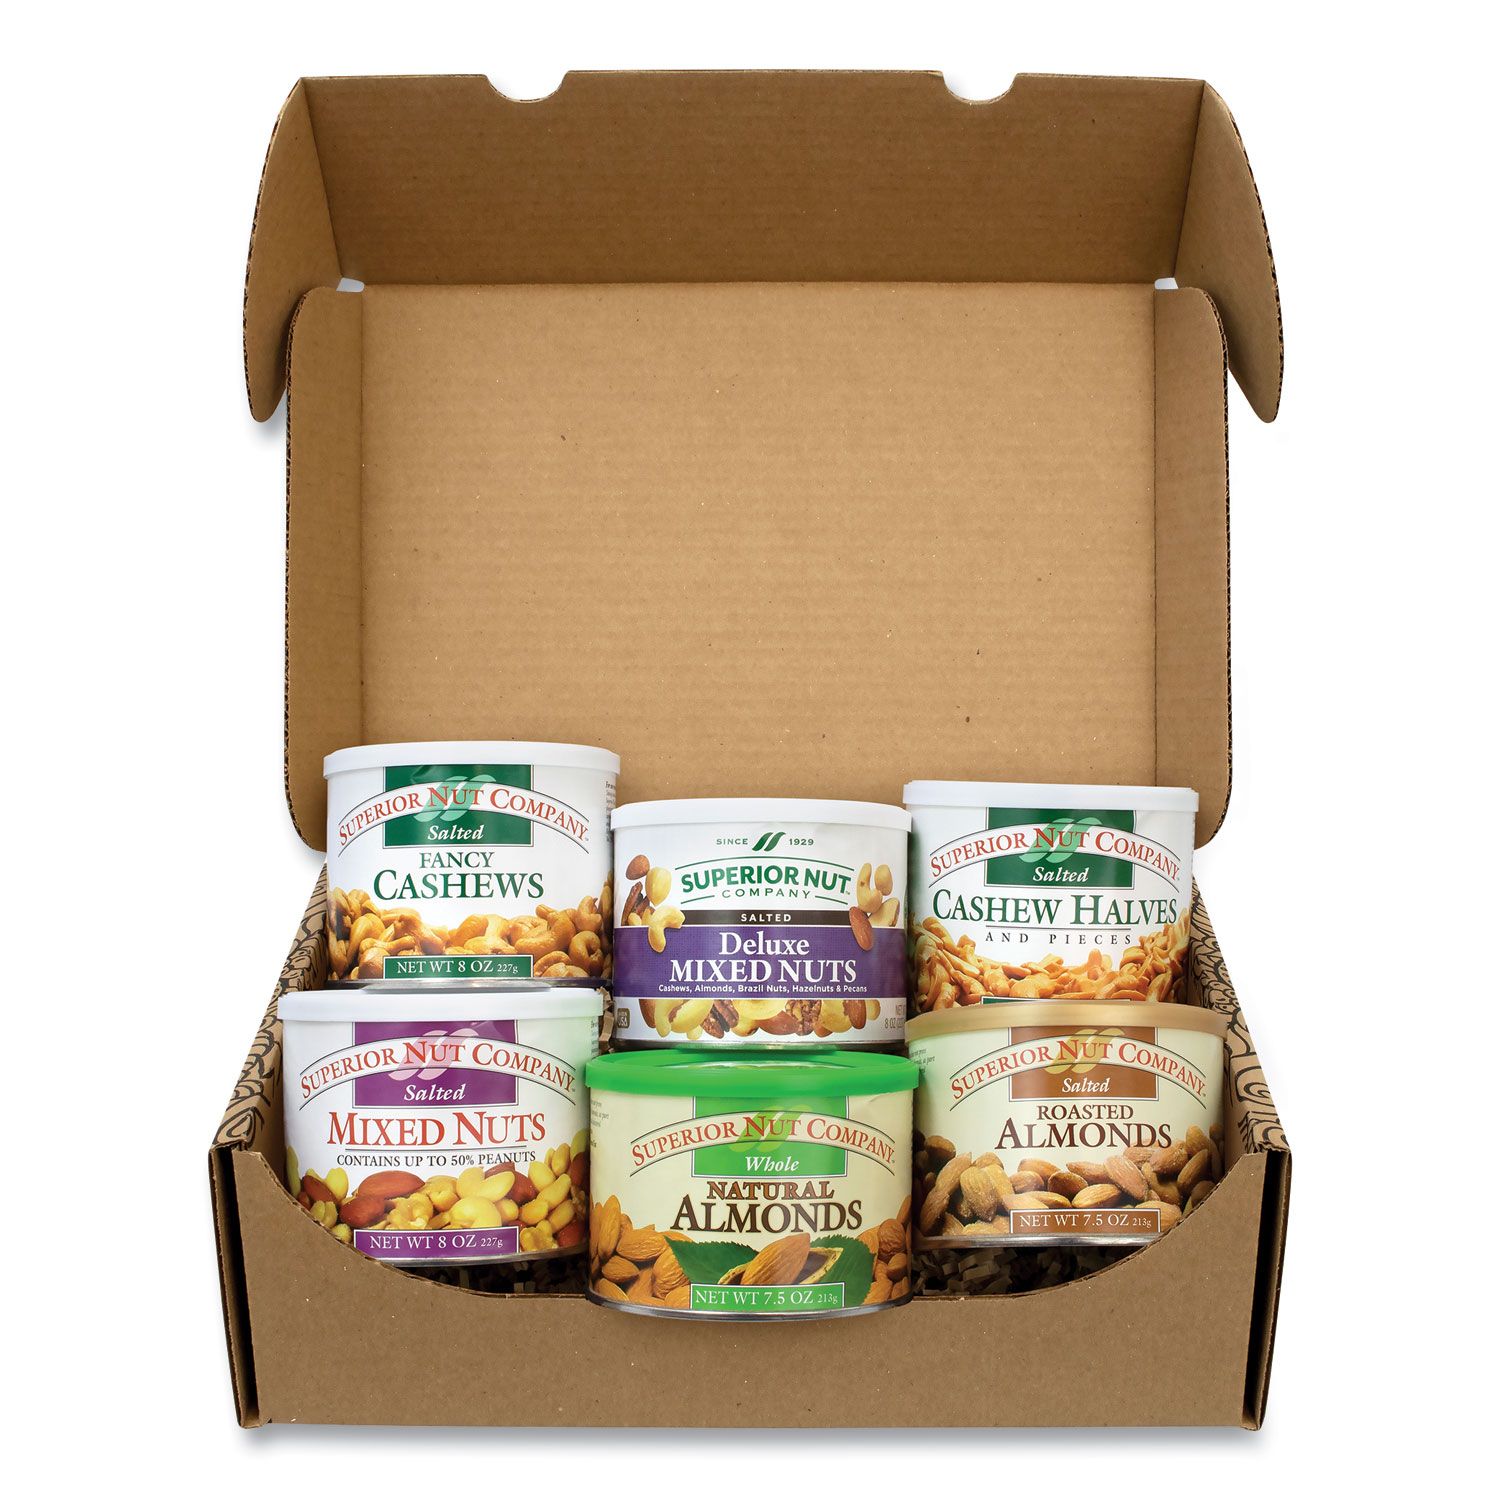  Snack Box Pros 70000019 Premium Nut Box, Assorted Nuts, 7.5-8 oz Cans, 6 Cans/Carton, Free Delivery in 1-4 Business Days (GRR70000019) 